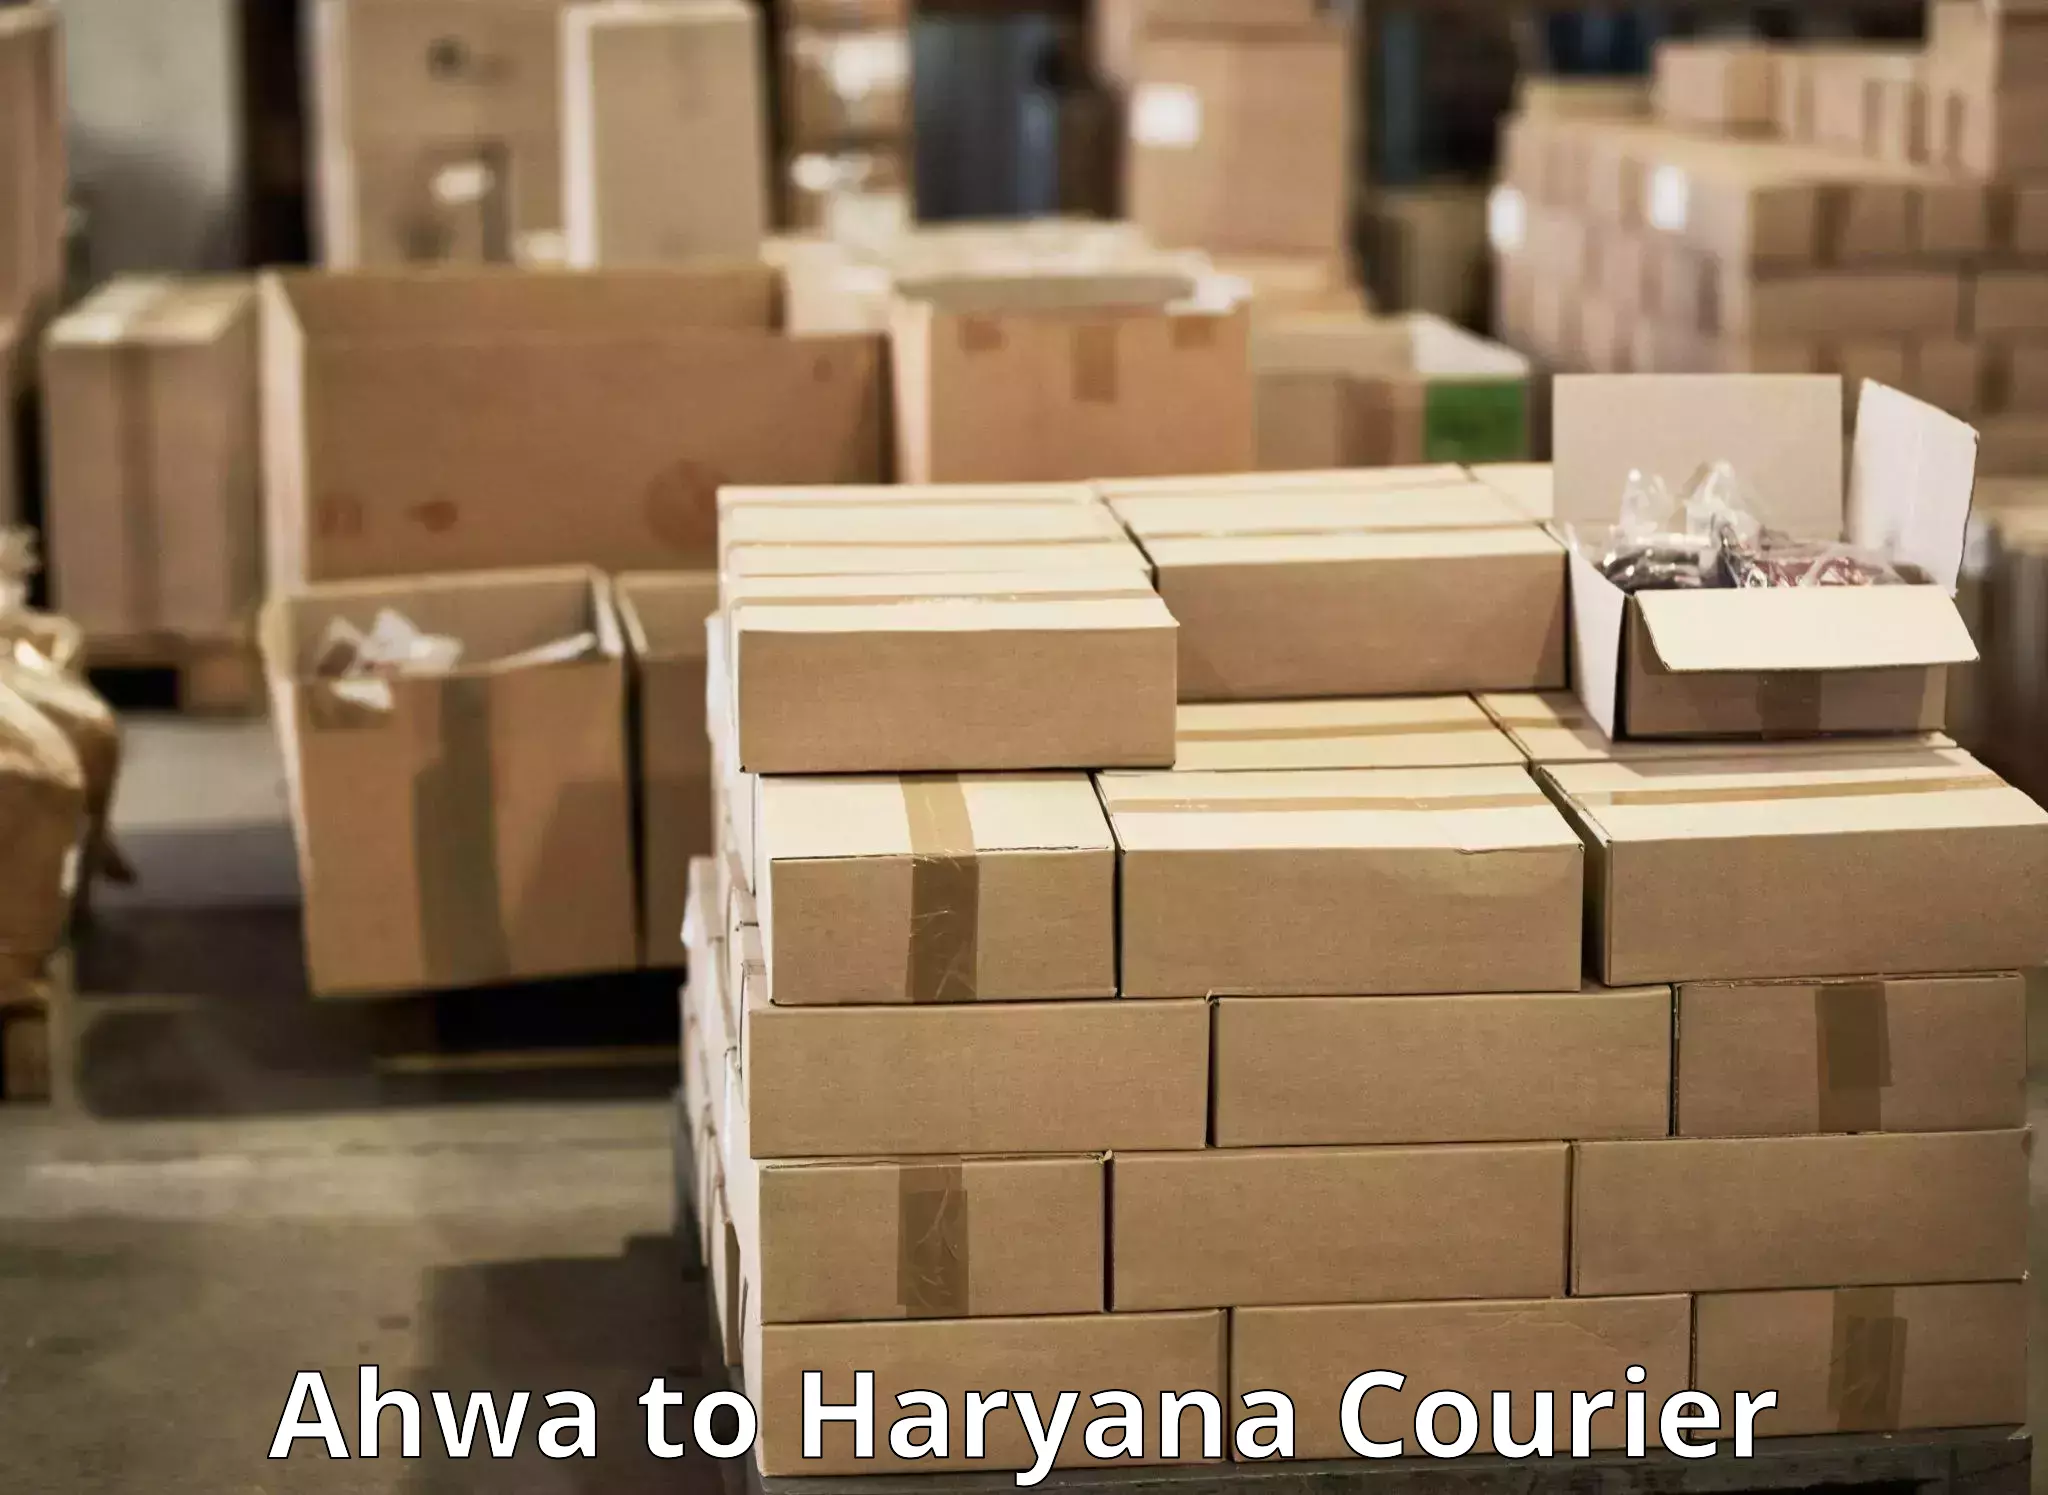 Bulk courier orders Ahwa to Gurgaon